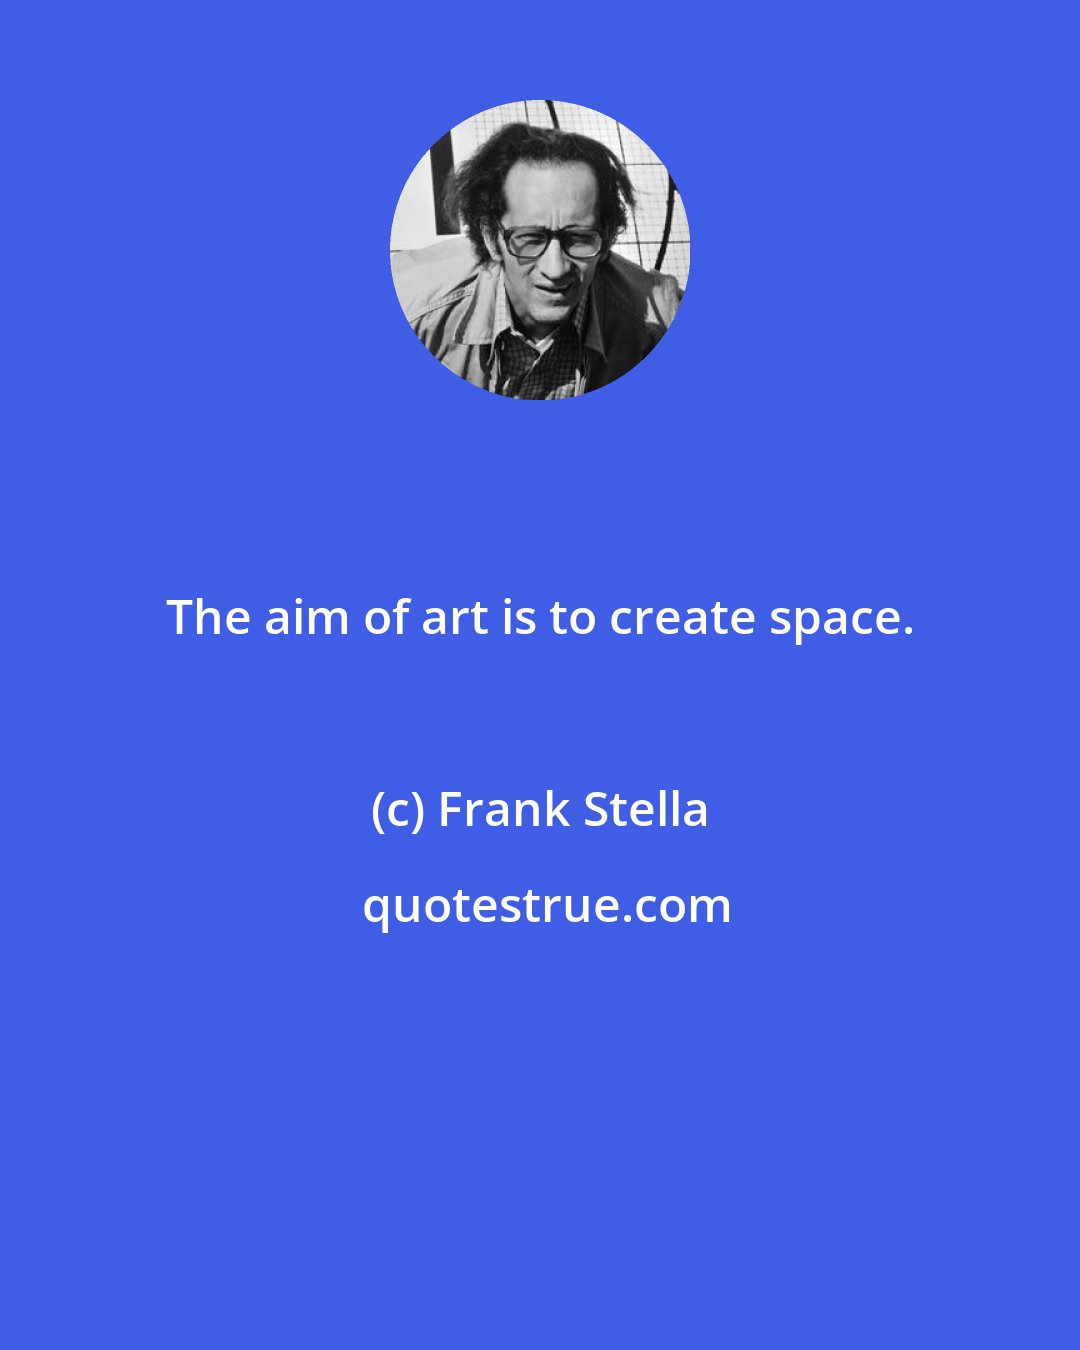 Frank Stella: The aim of art is to create space.